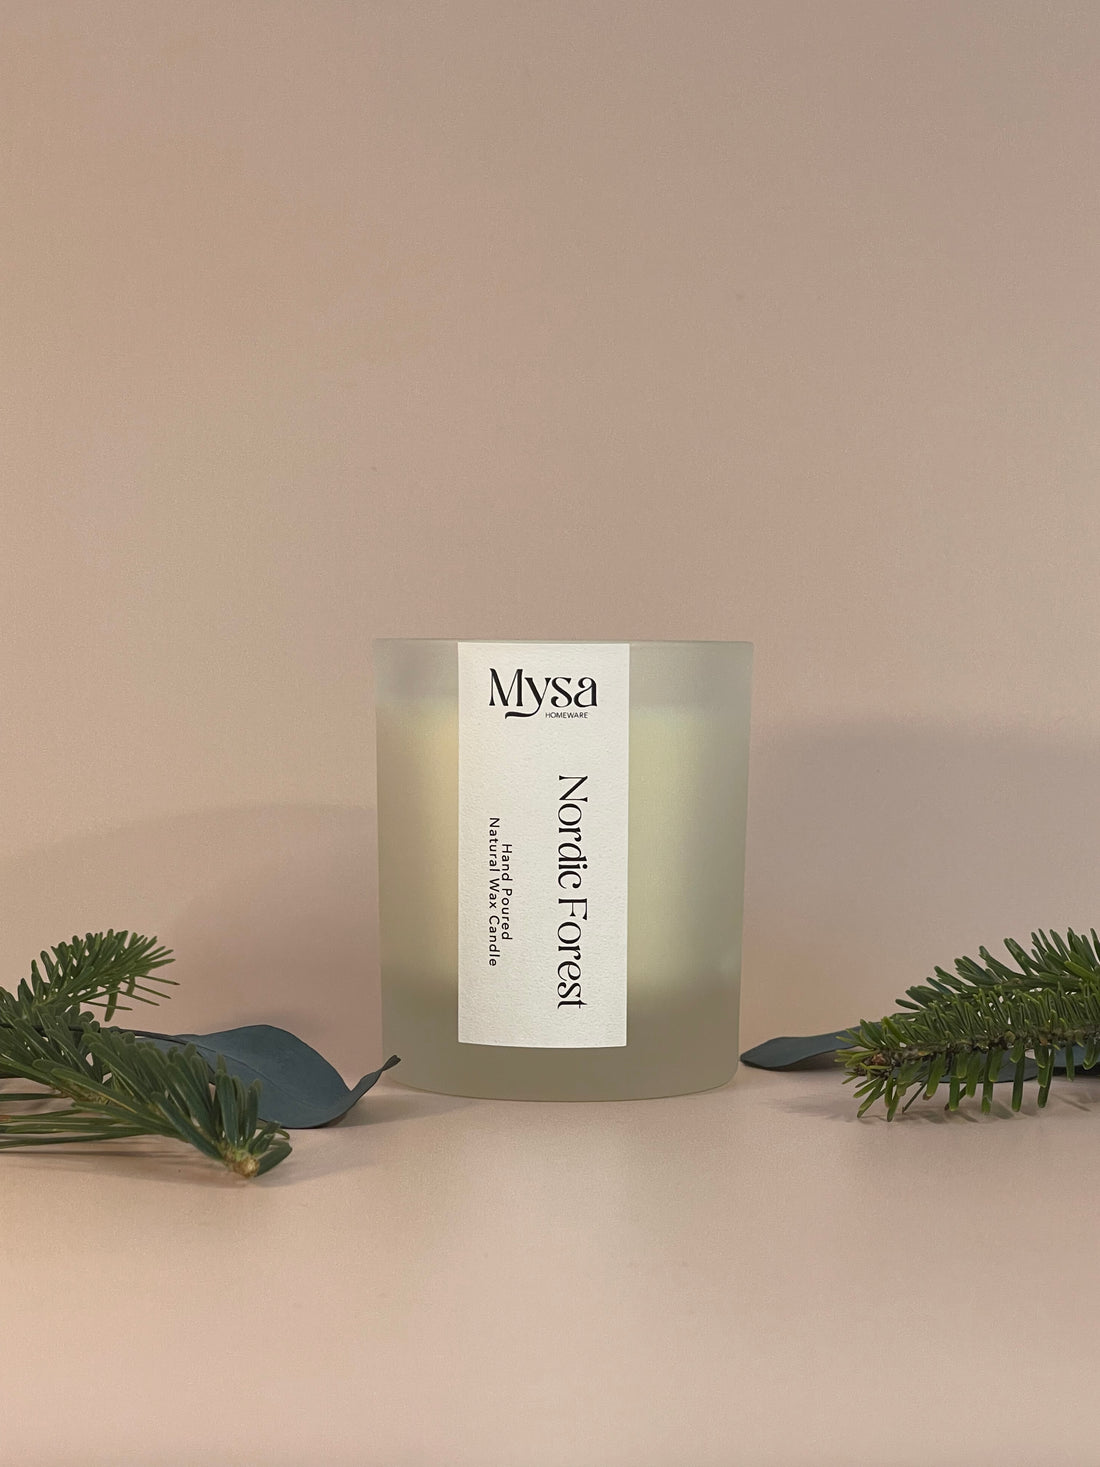 Nordic Forest luxury scented candle in gift box, with natural wax and pine and eucalyptus fragrance.